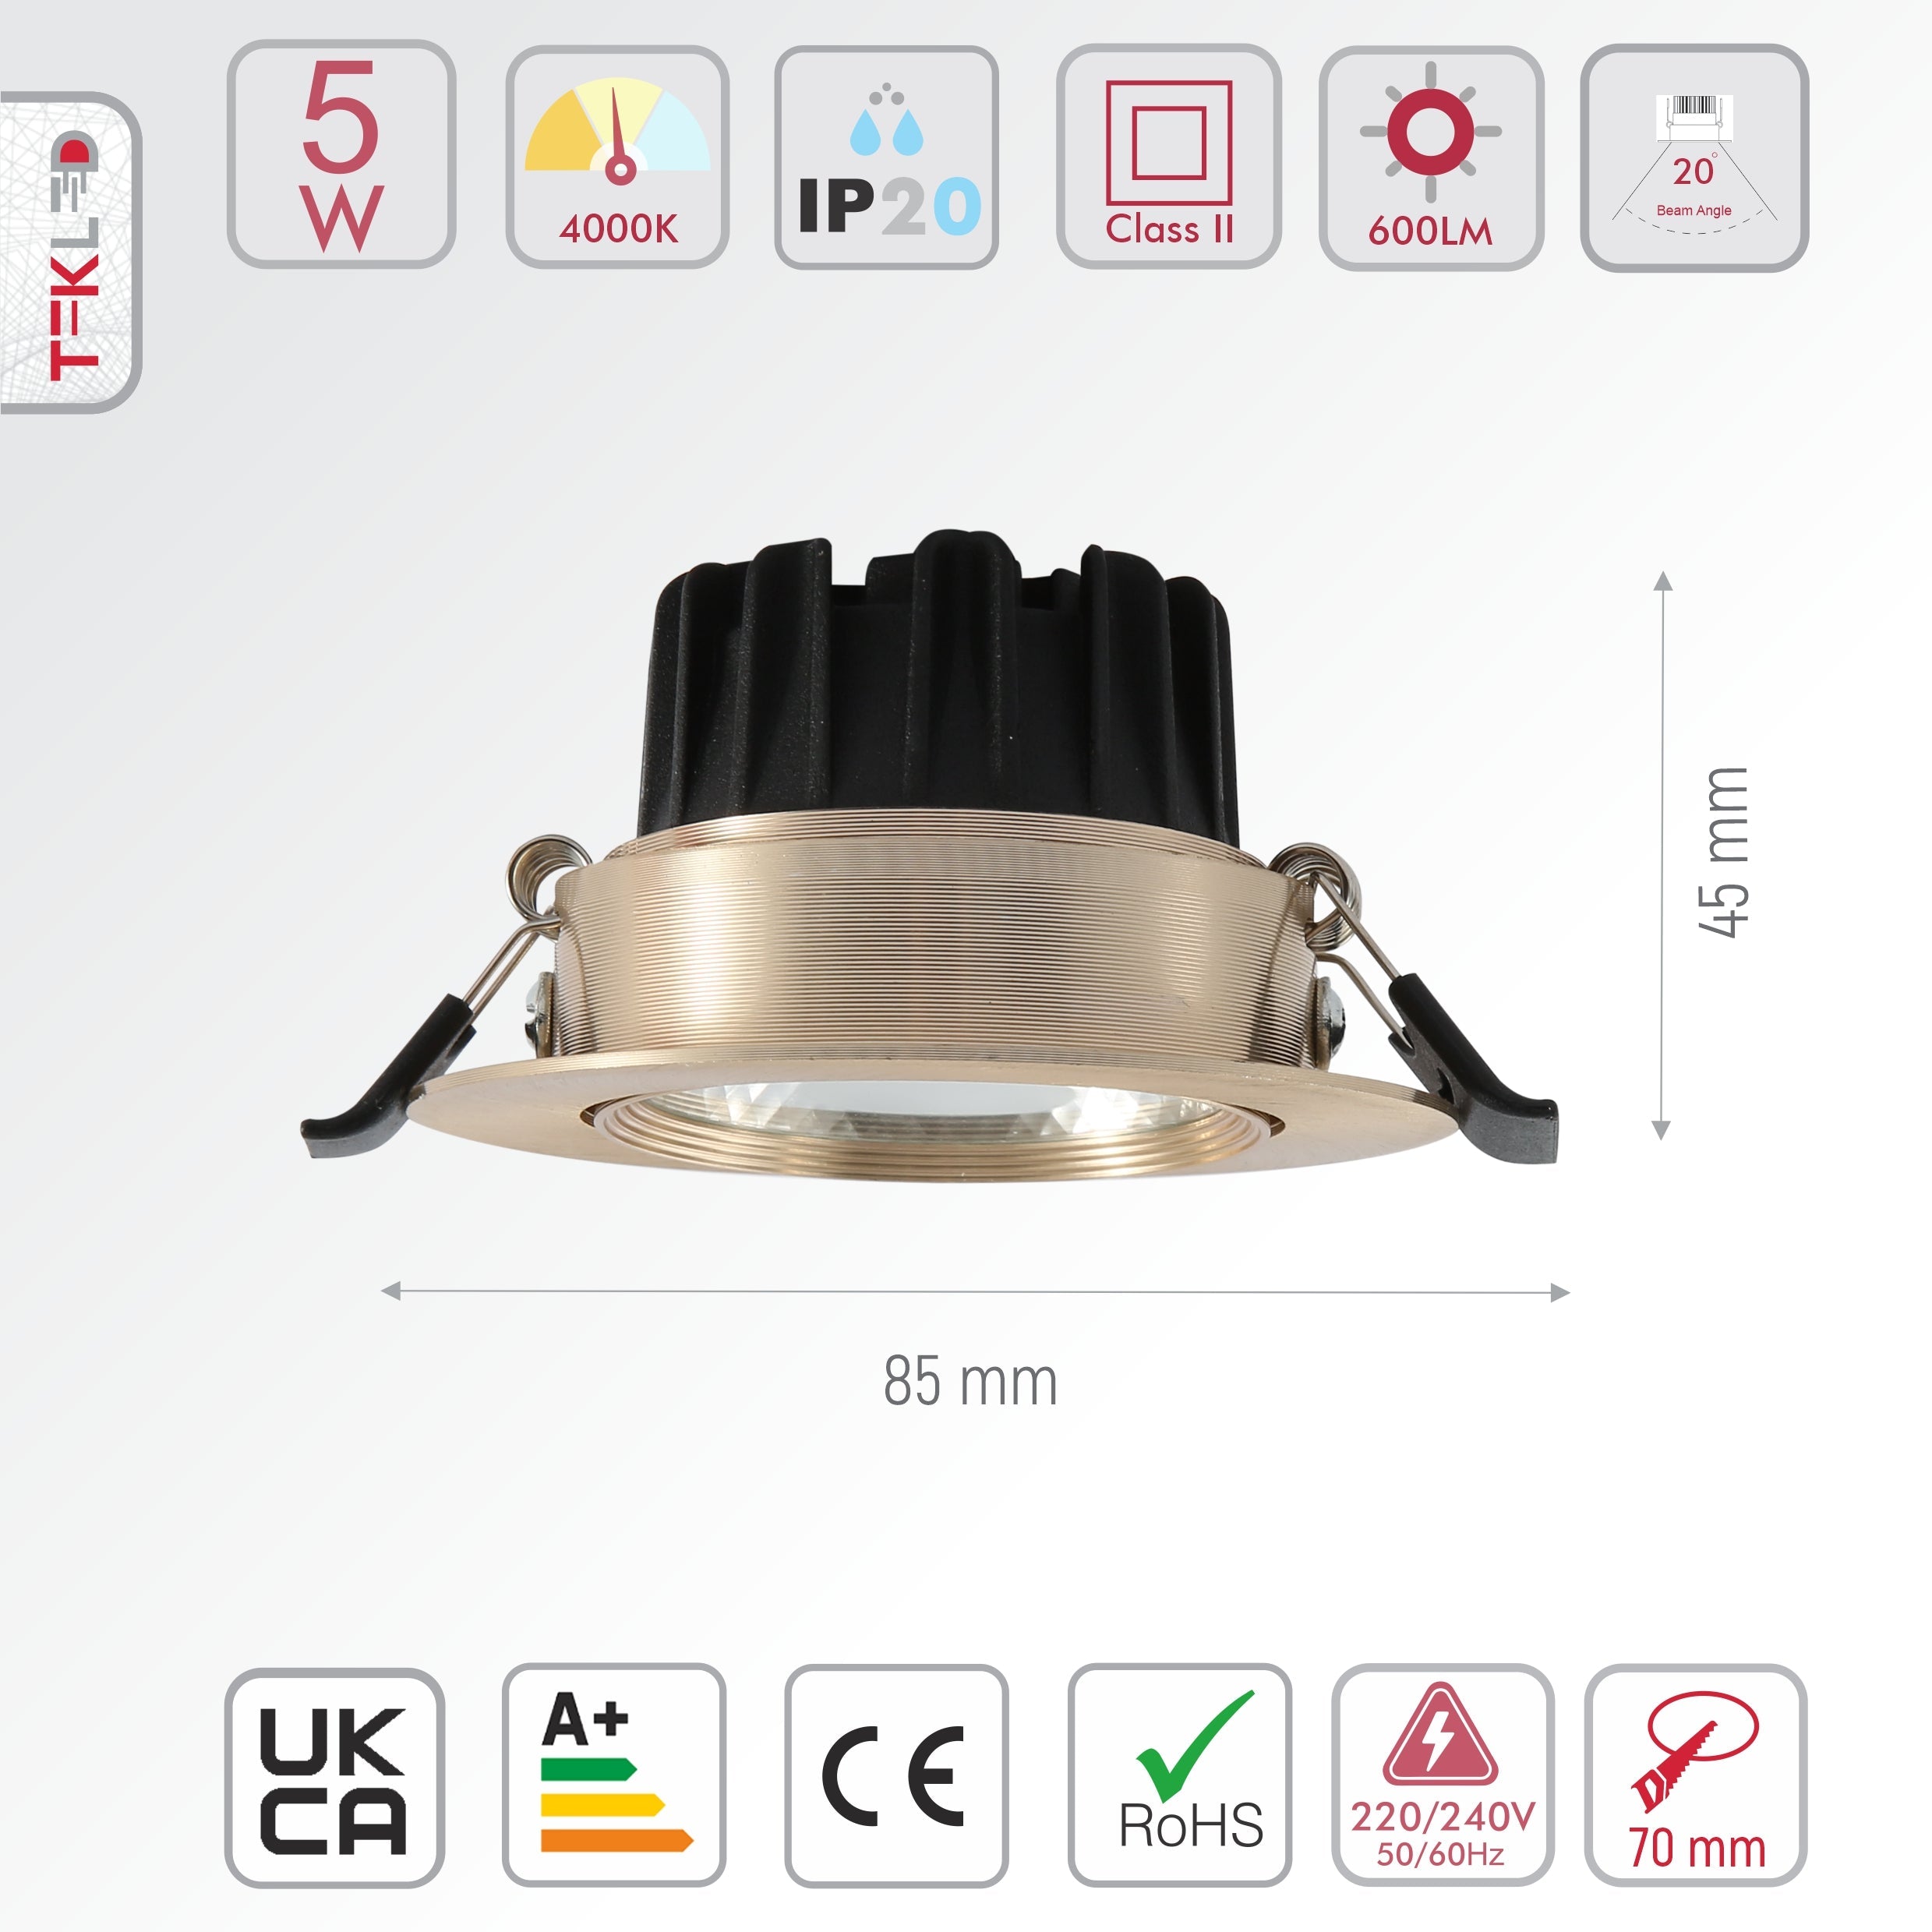 Size and specs of LED COB Recessed Downlight 5W Cool White 4000K Antique Brass | TEKLED 145-03070